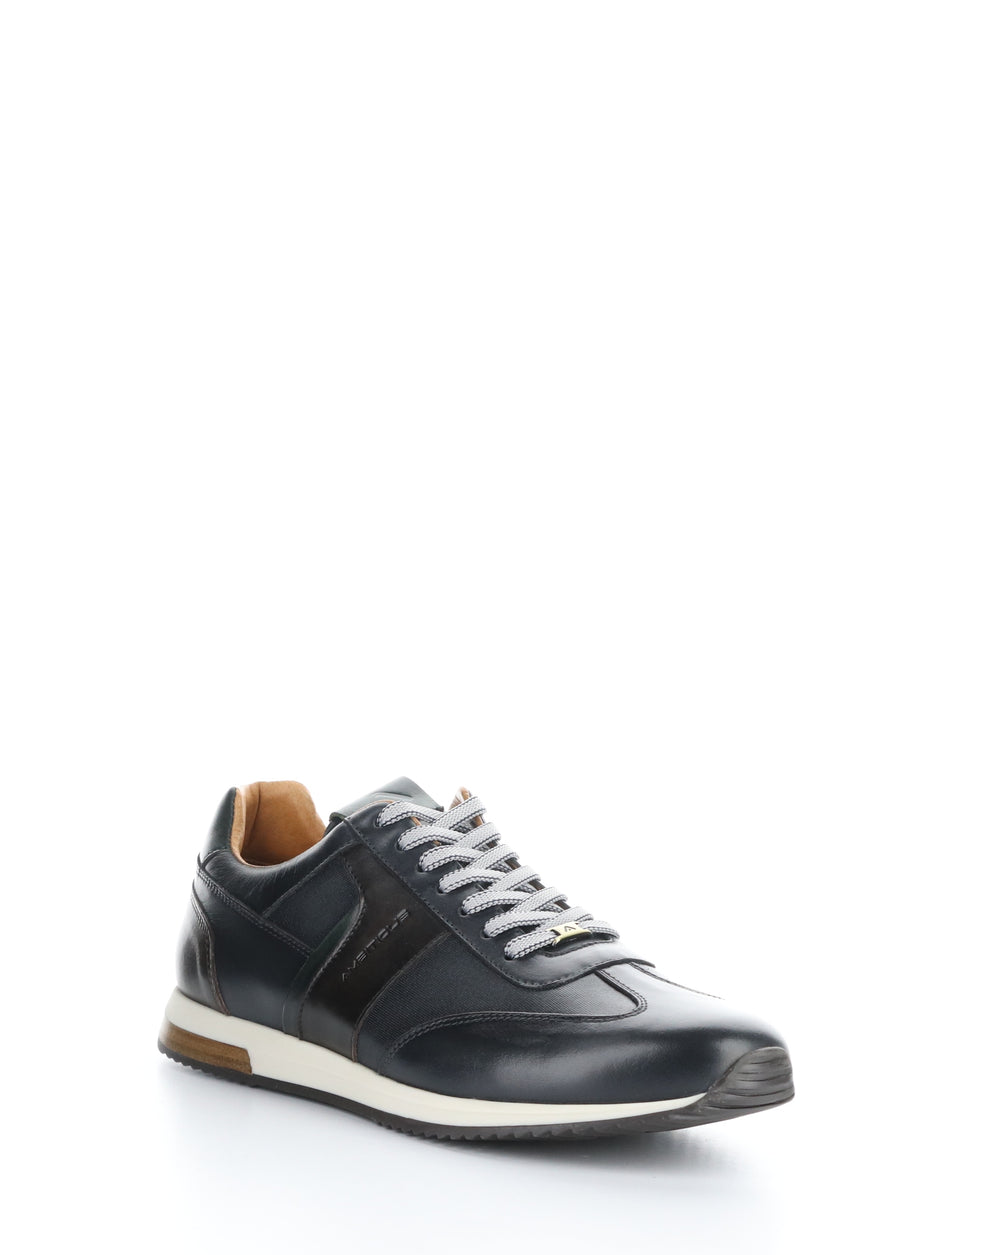 11721 ANTHRACITE COMBI Lace-up Shoes